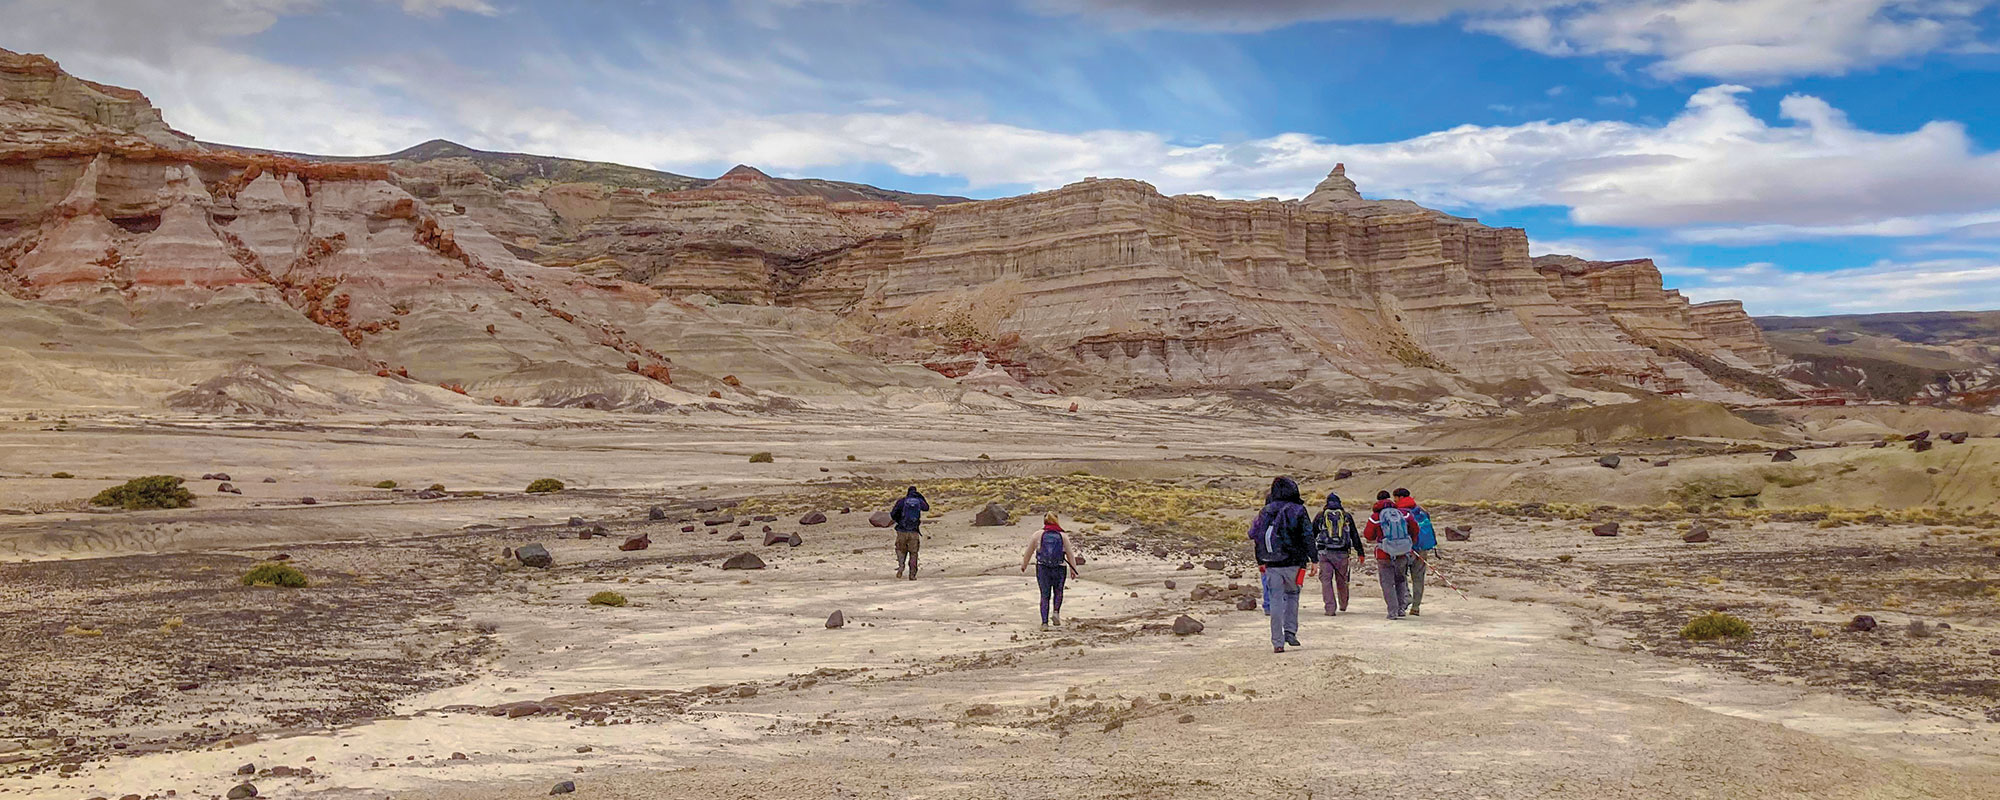 A group walking away from the camera in a large desolate area.